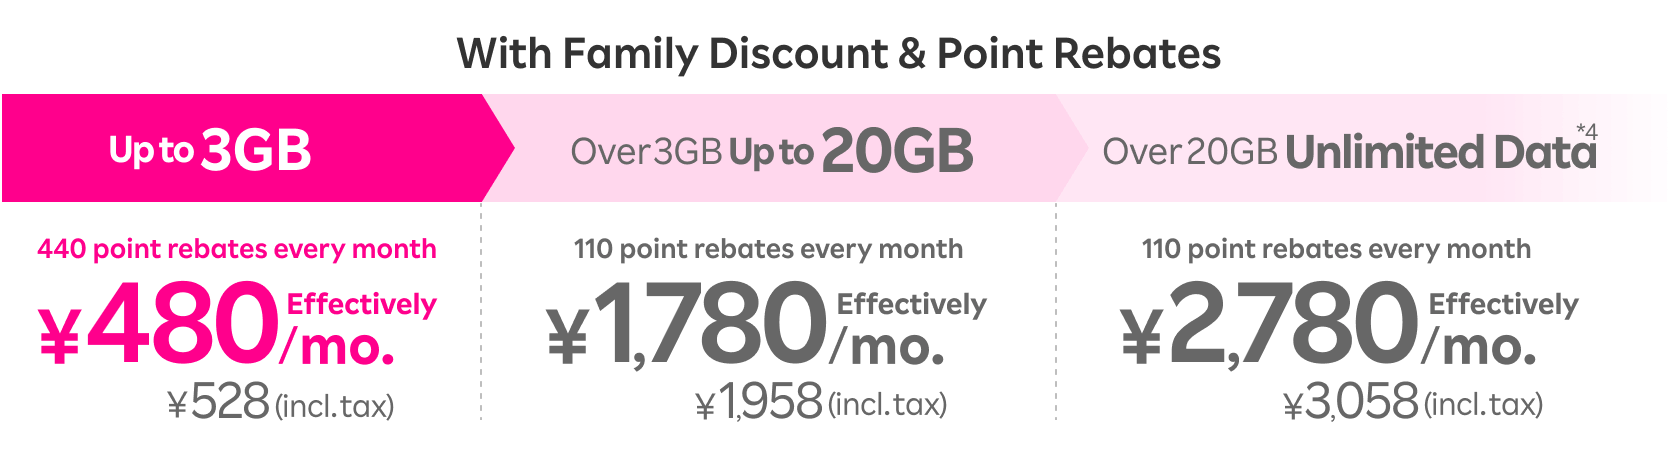 With Family Discount & Point Rebates